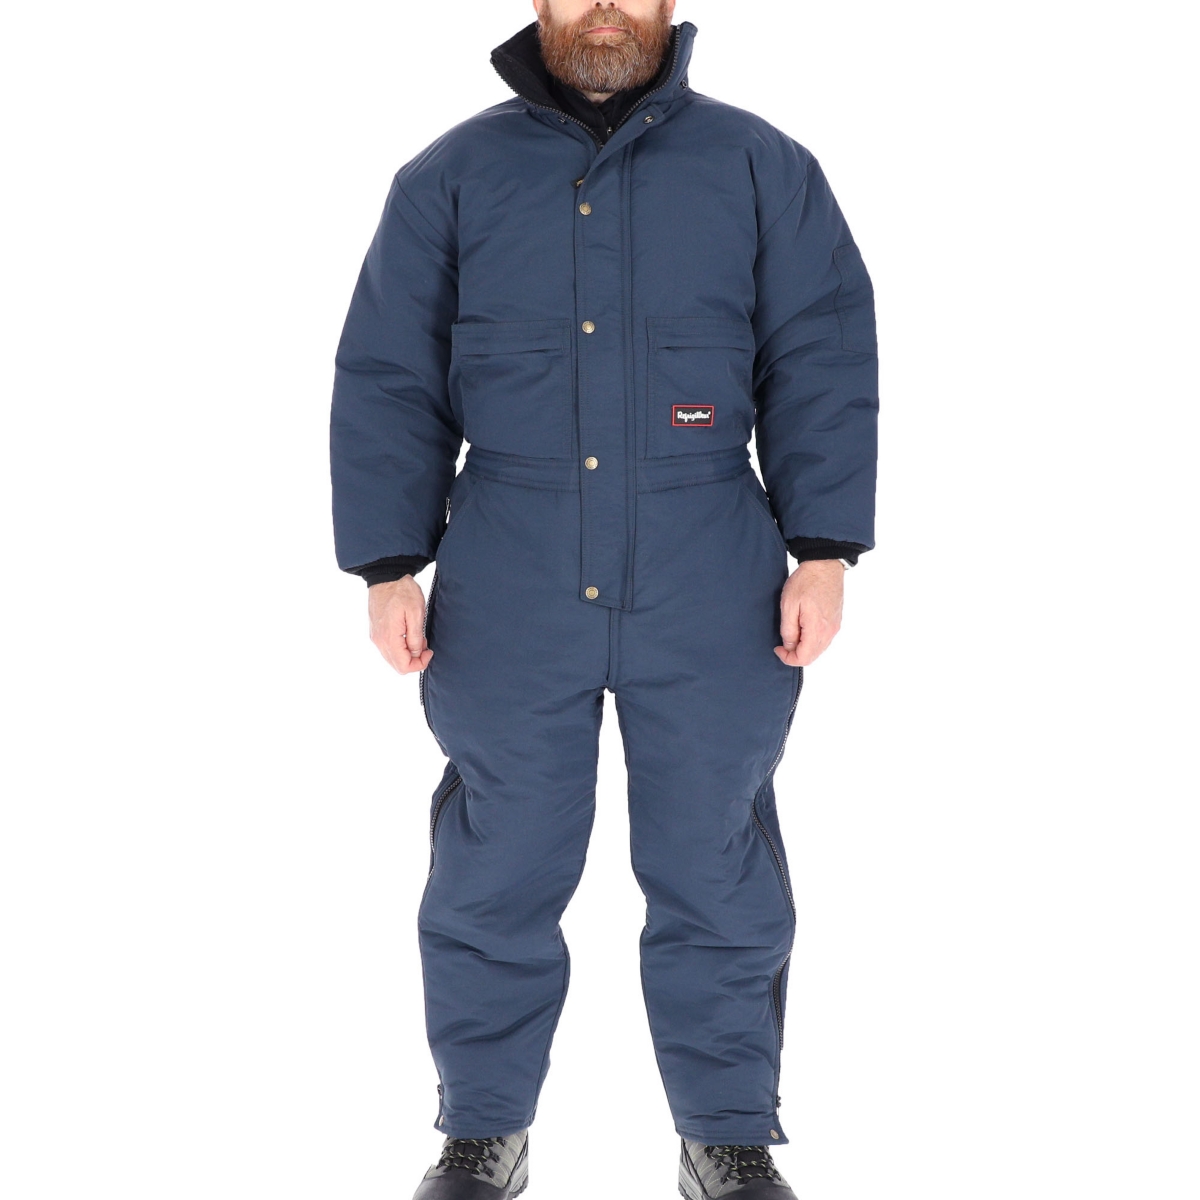 Men's ChillBreaker Insulated Coveralls with Soft Fleece Lined Collar - Navy